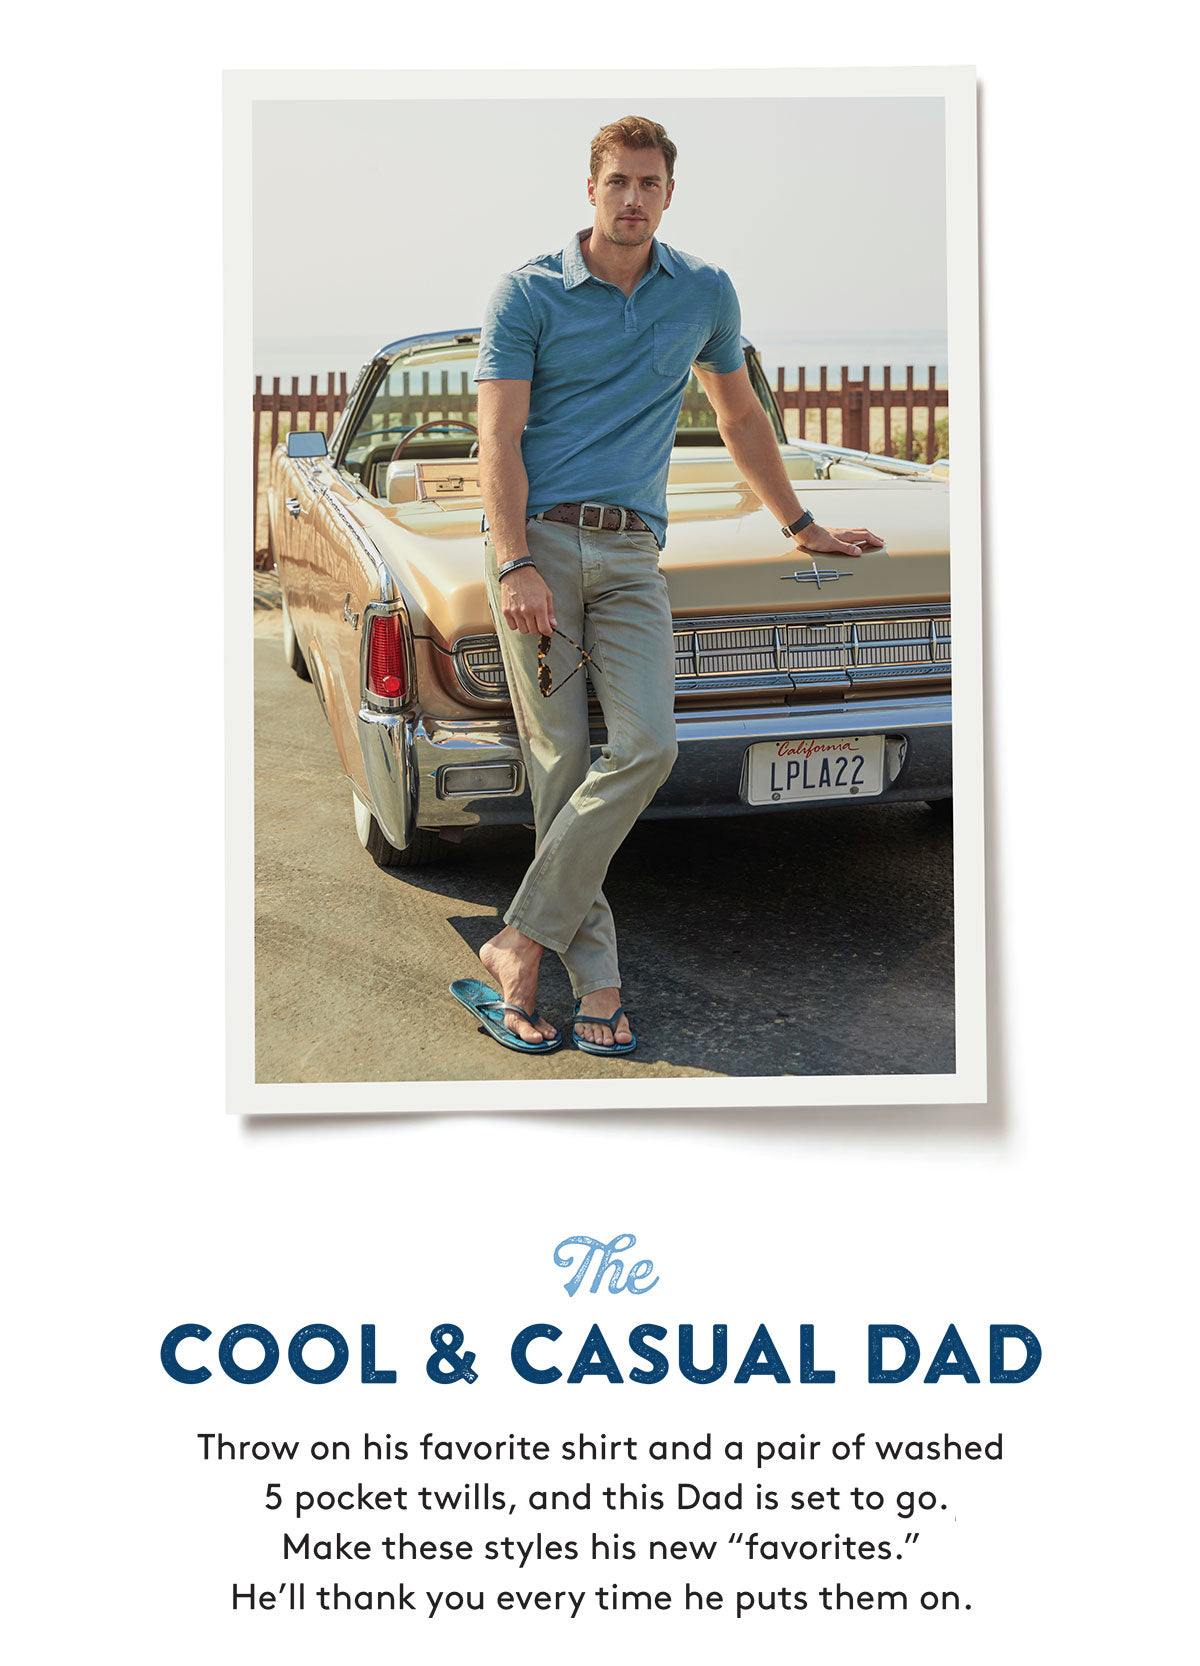 The COOL & CASUAL DAD Throw on his favorite shirt and a pair of washed back 5 pocket twills, and this Dad is set to go. Make these styles his new "favorites. He'll thank you every time he puts them on.